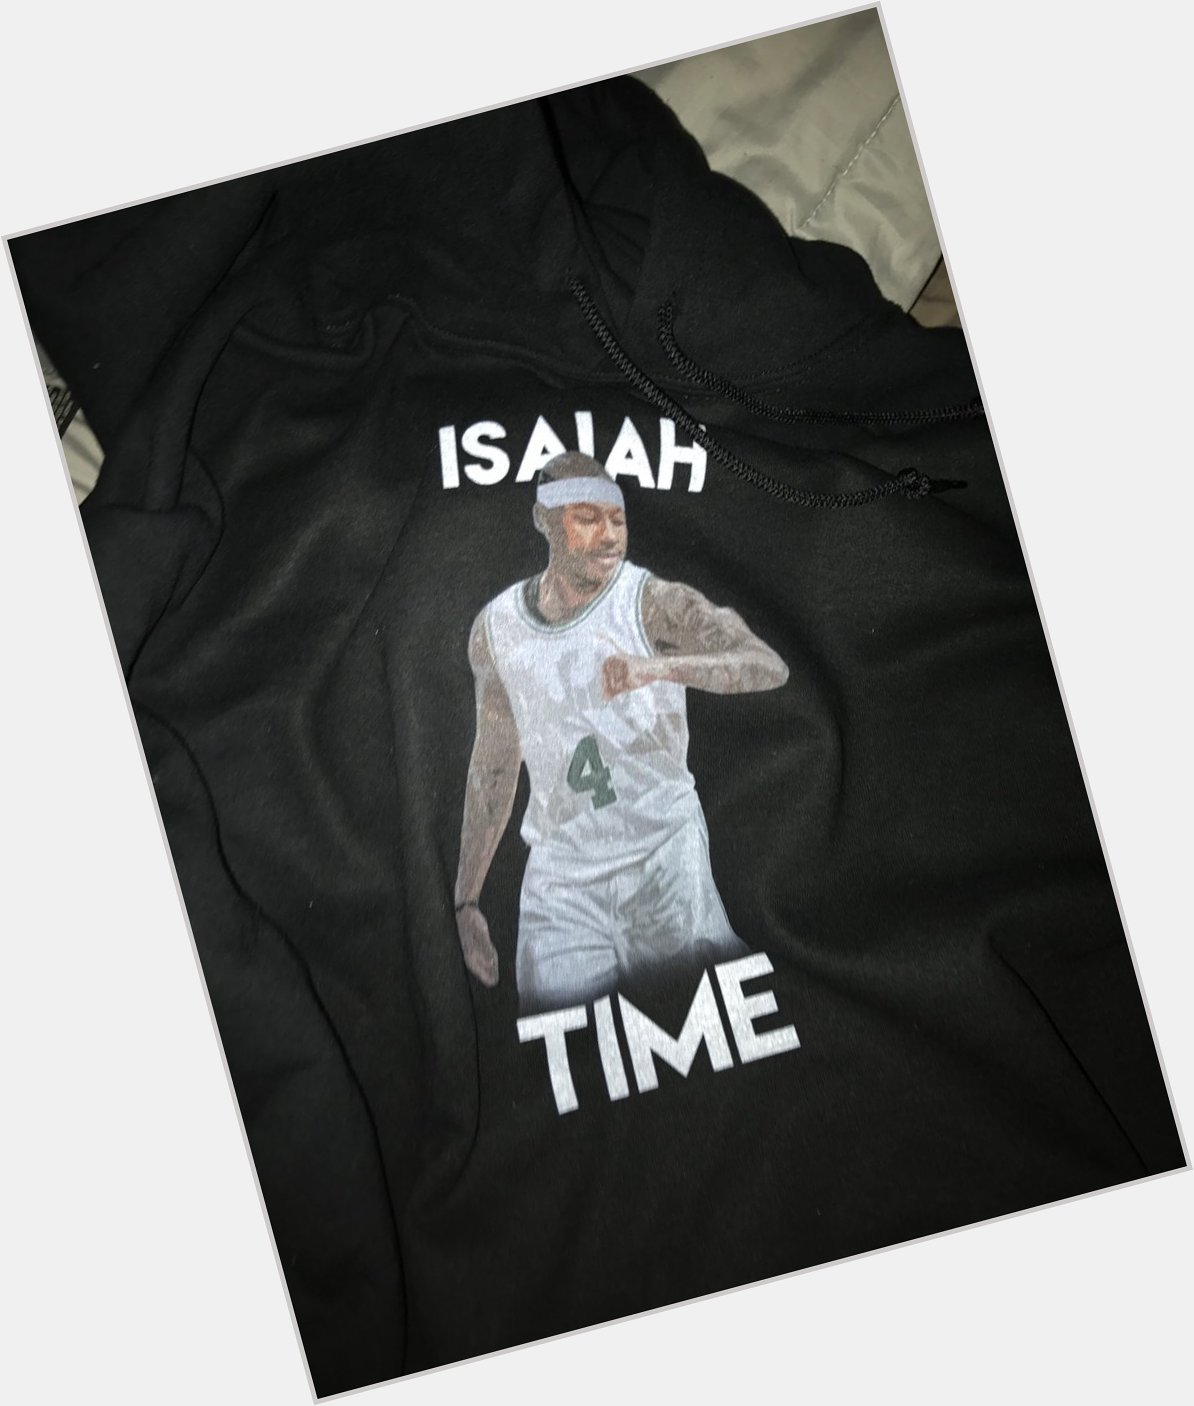 Had to cop the I.T. time sweater! Happy birthday to a Celtic great keep leadin us    